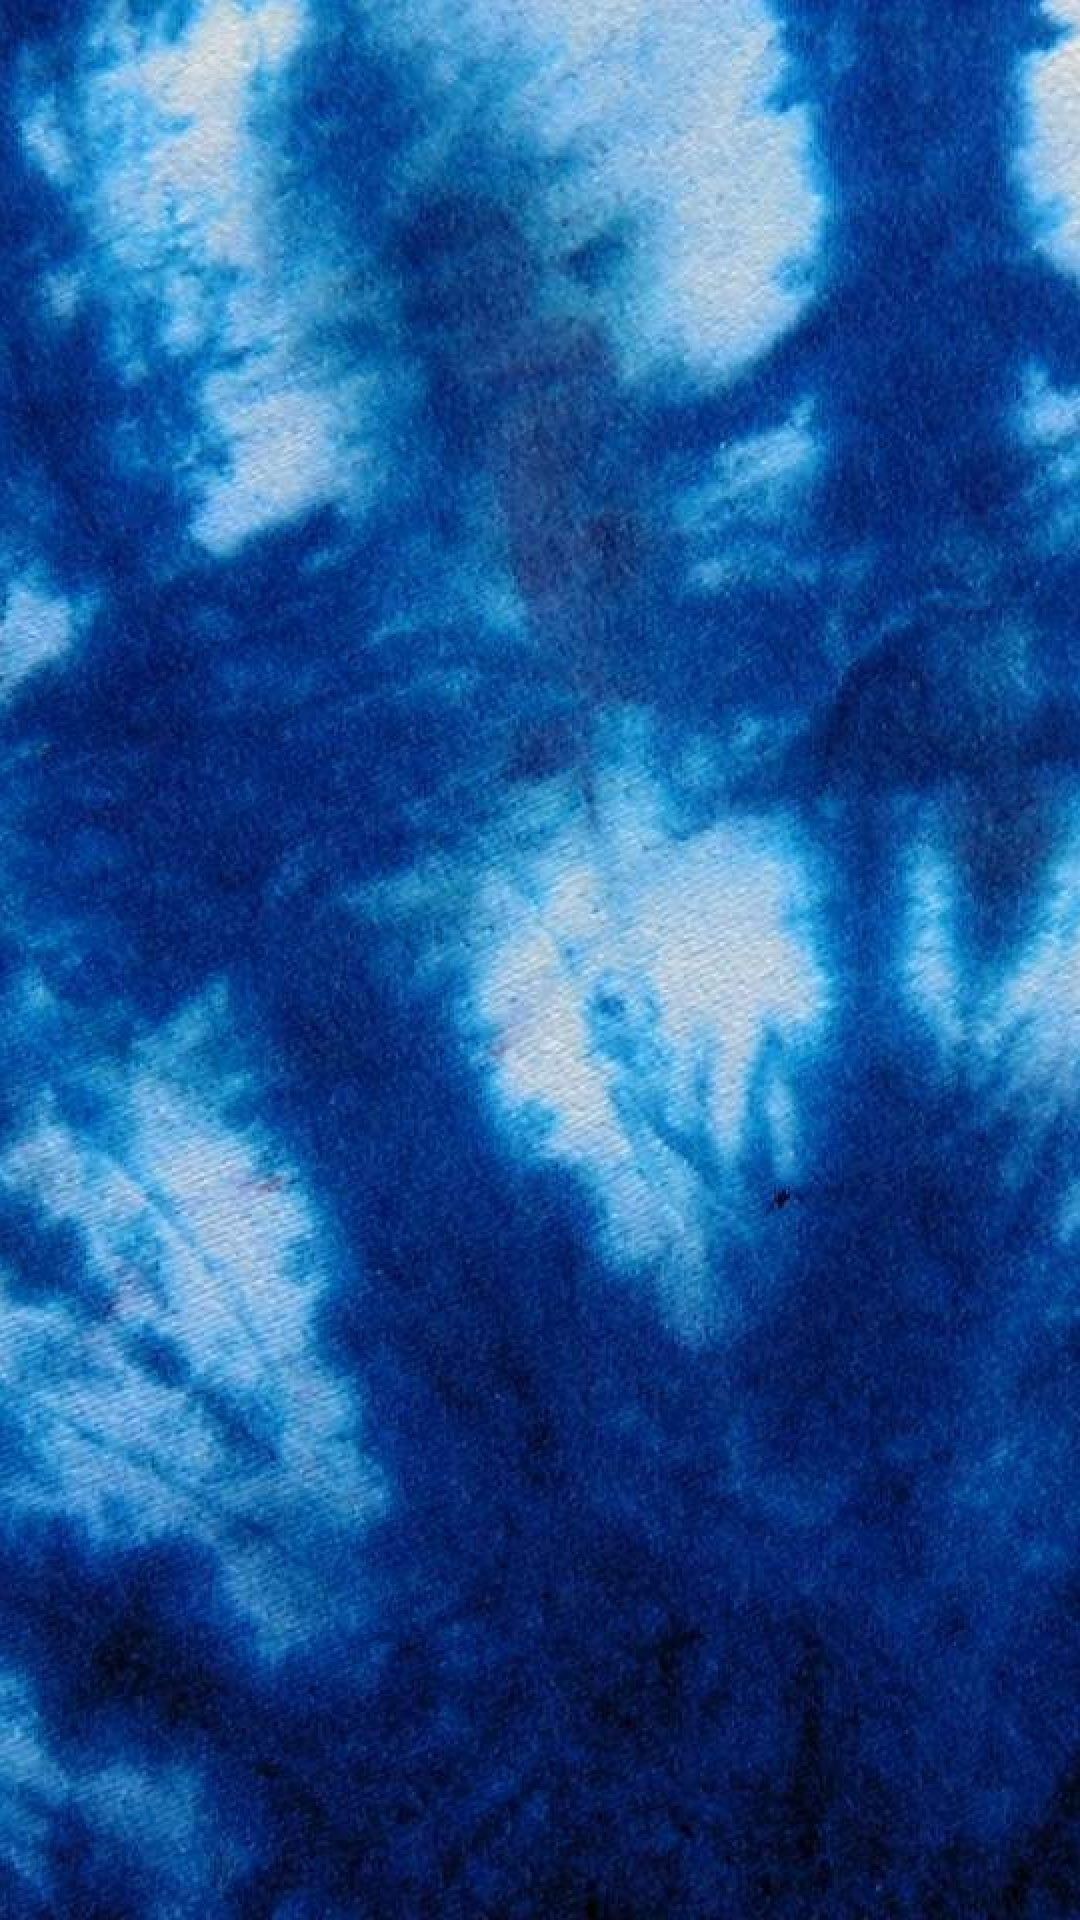 Tie Dye Shibori Pattern Background Watercolour Abstract Texture Stock  Illustration  Download Image Now  iStock